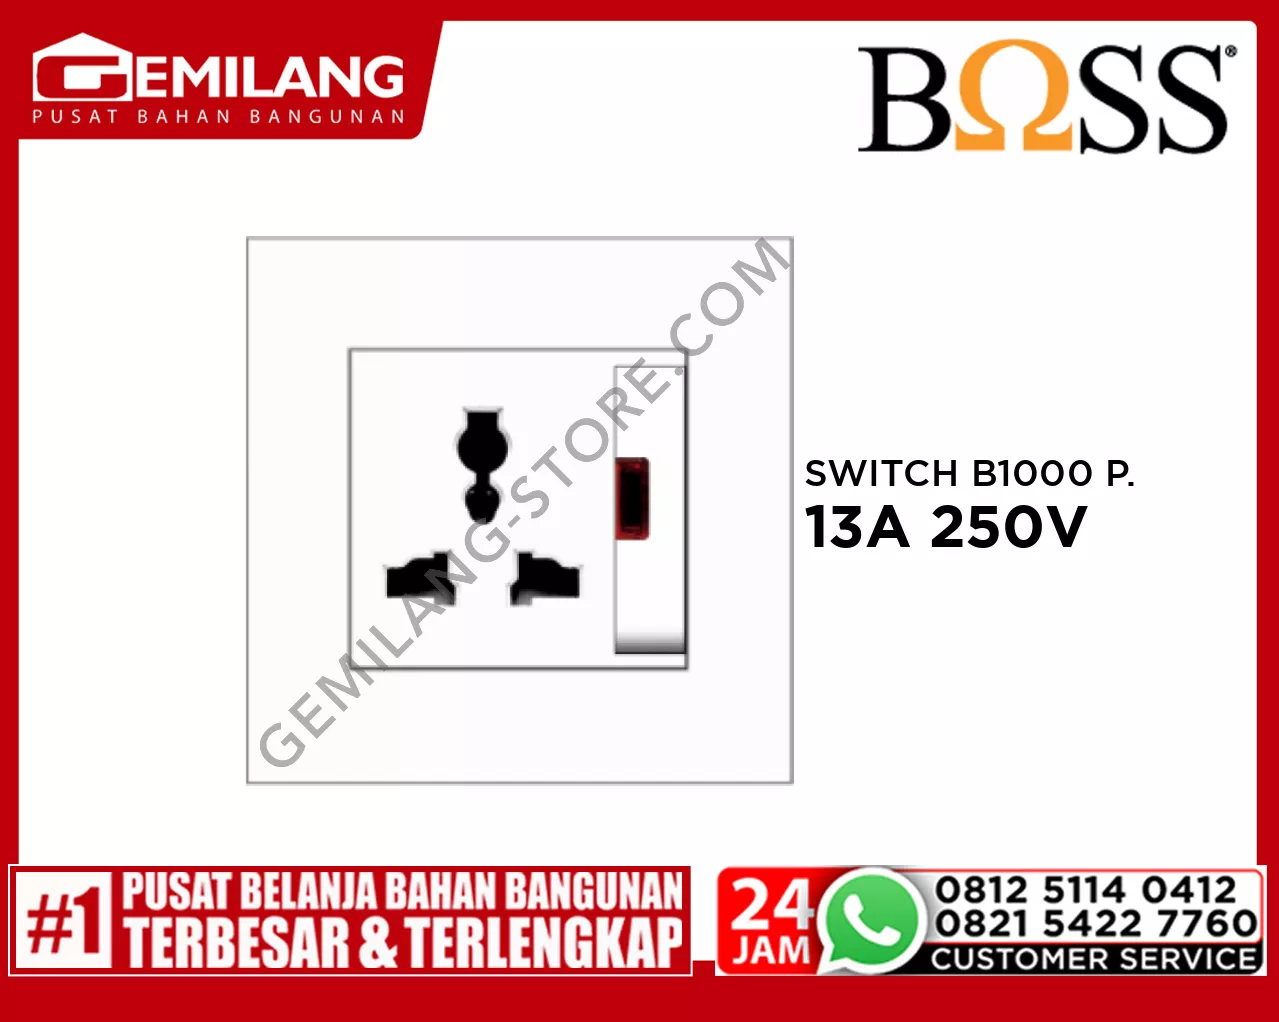 BOSS SWITCH B1000 PURO UNI.SOCKET OUTLET W/NEON & SAFETY 13A 250V B10113LSN